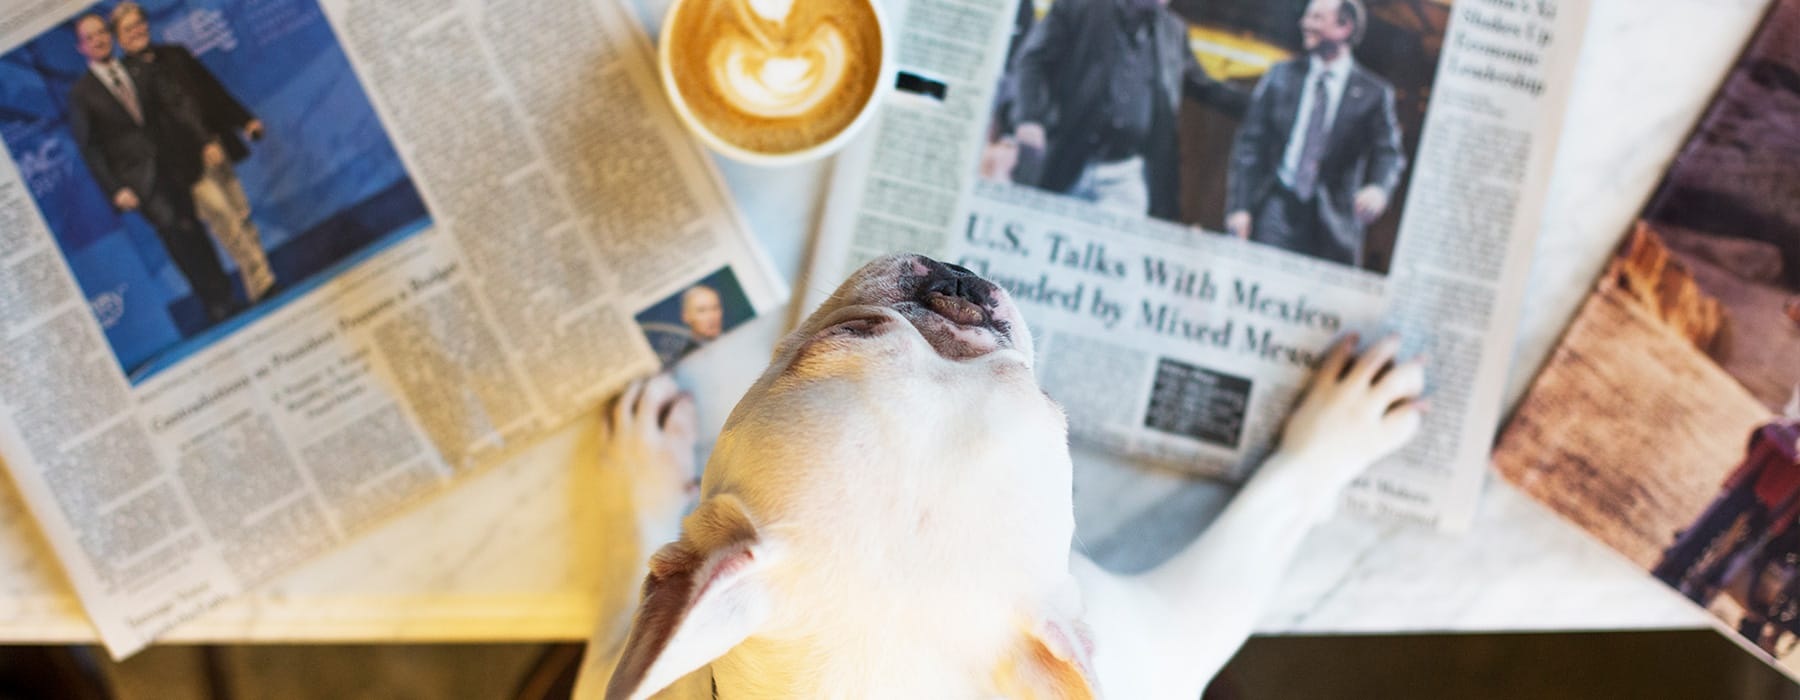 lifestyle image of a dog in front of newspapers and beside a mug of coffee